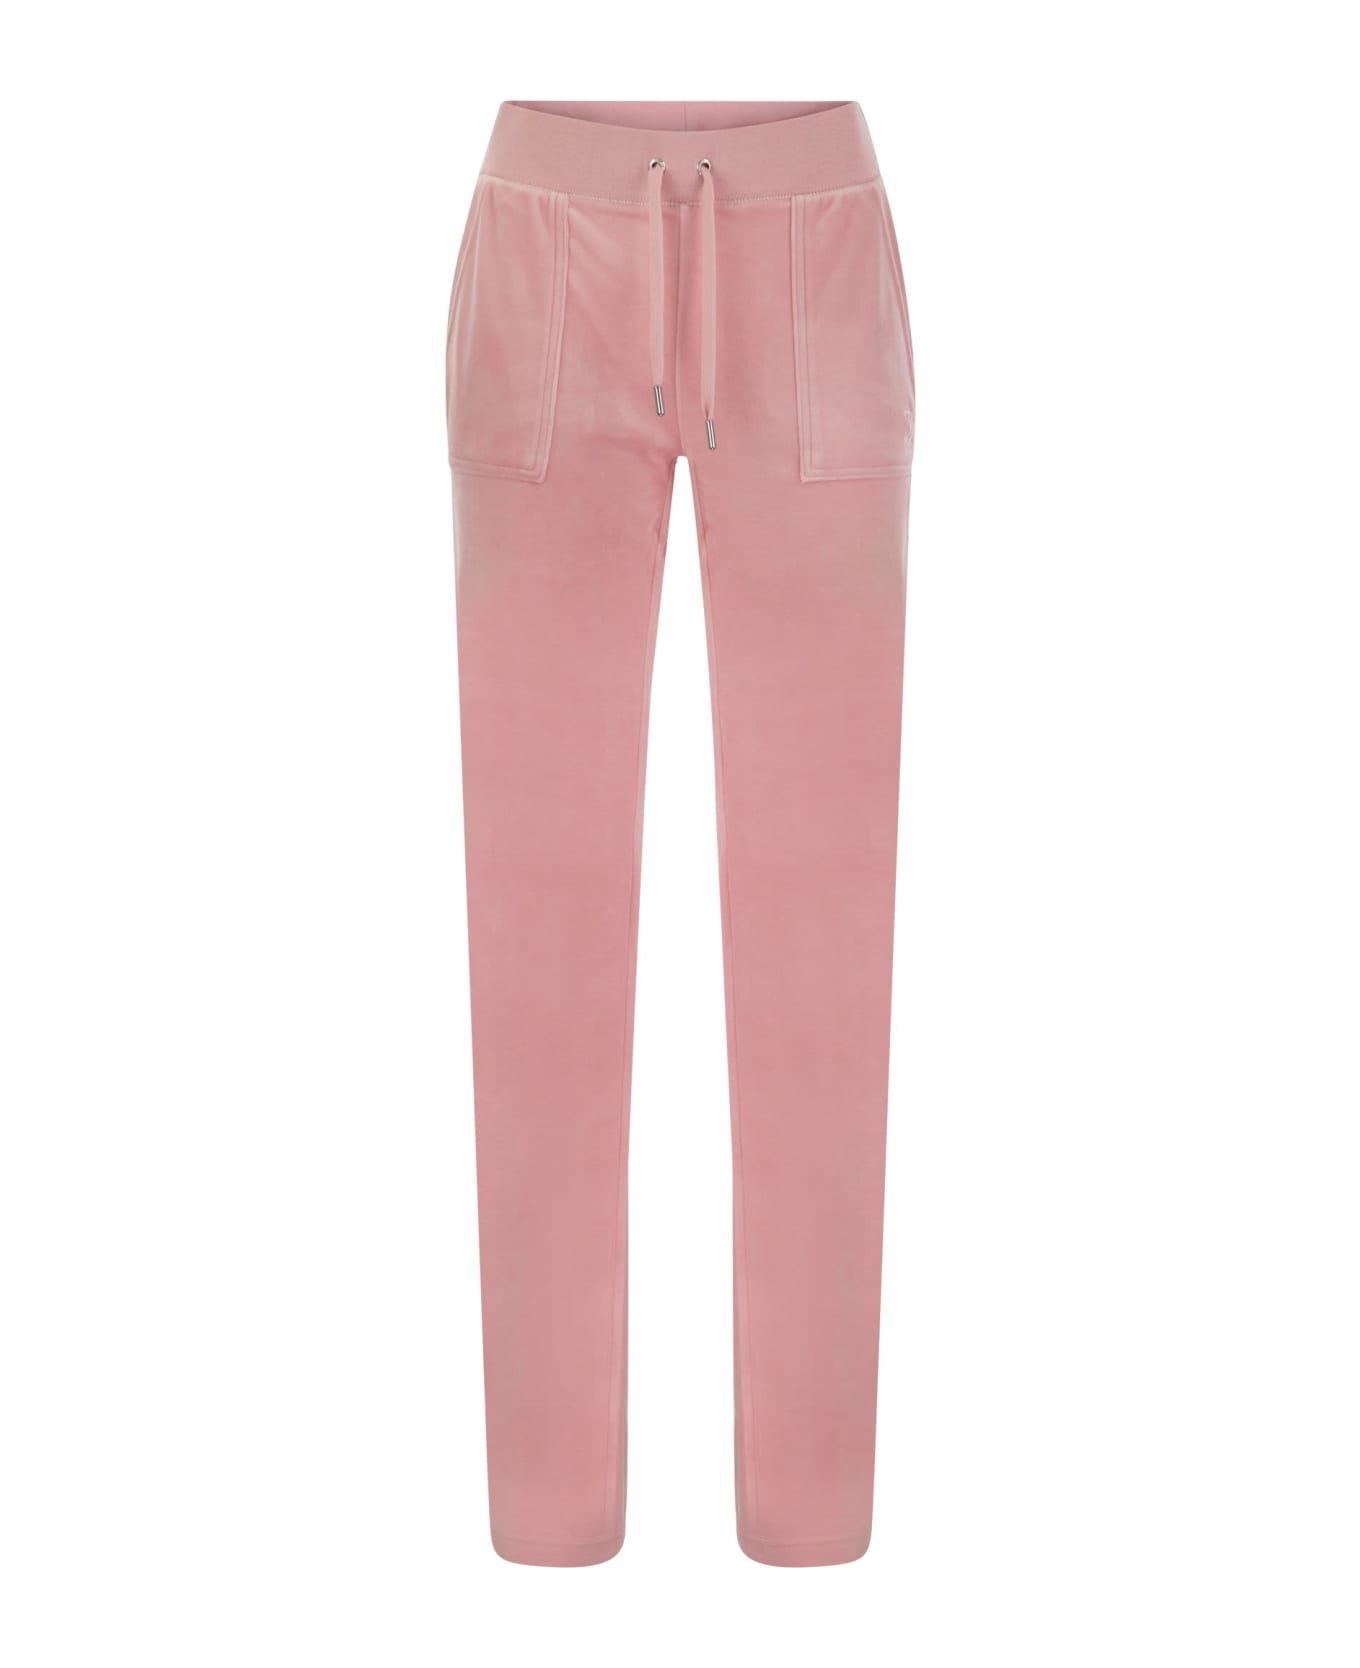 Juicy Couture Trousers With Velour Pockets - Pink